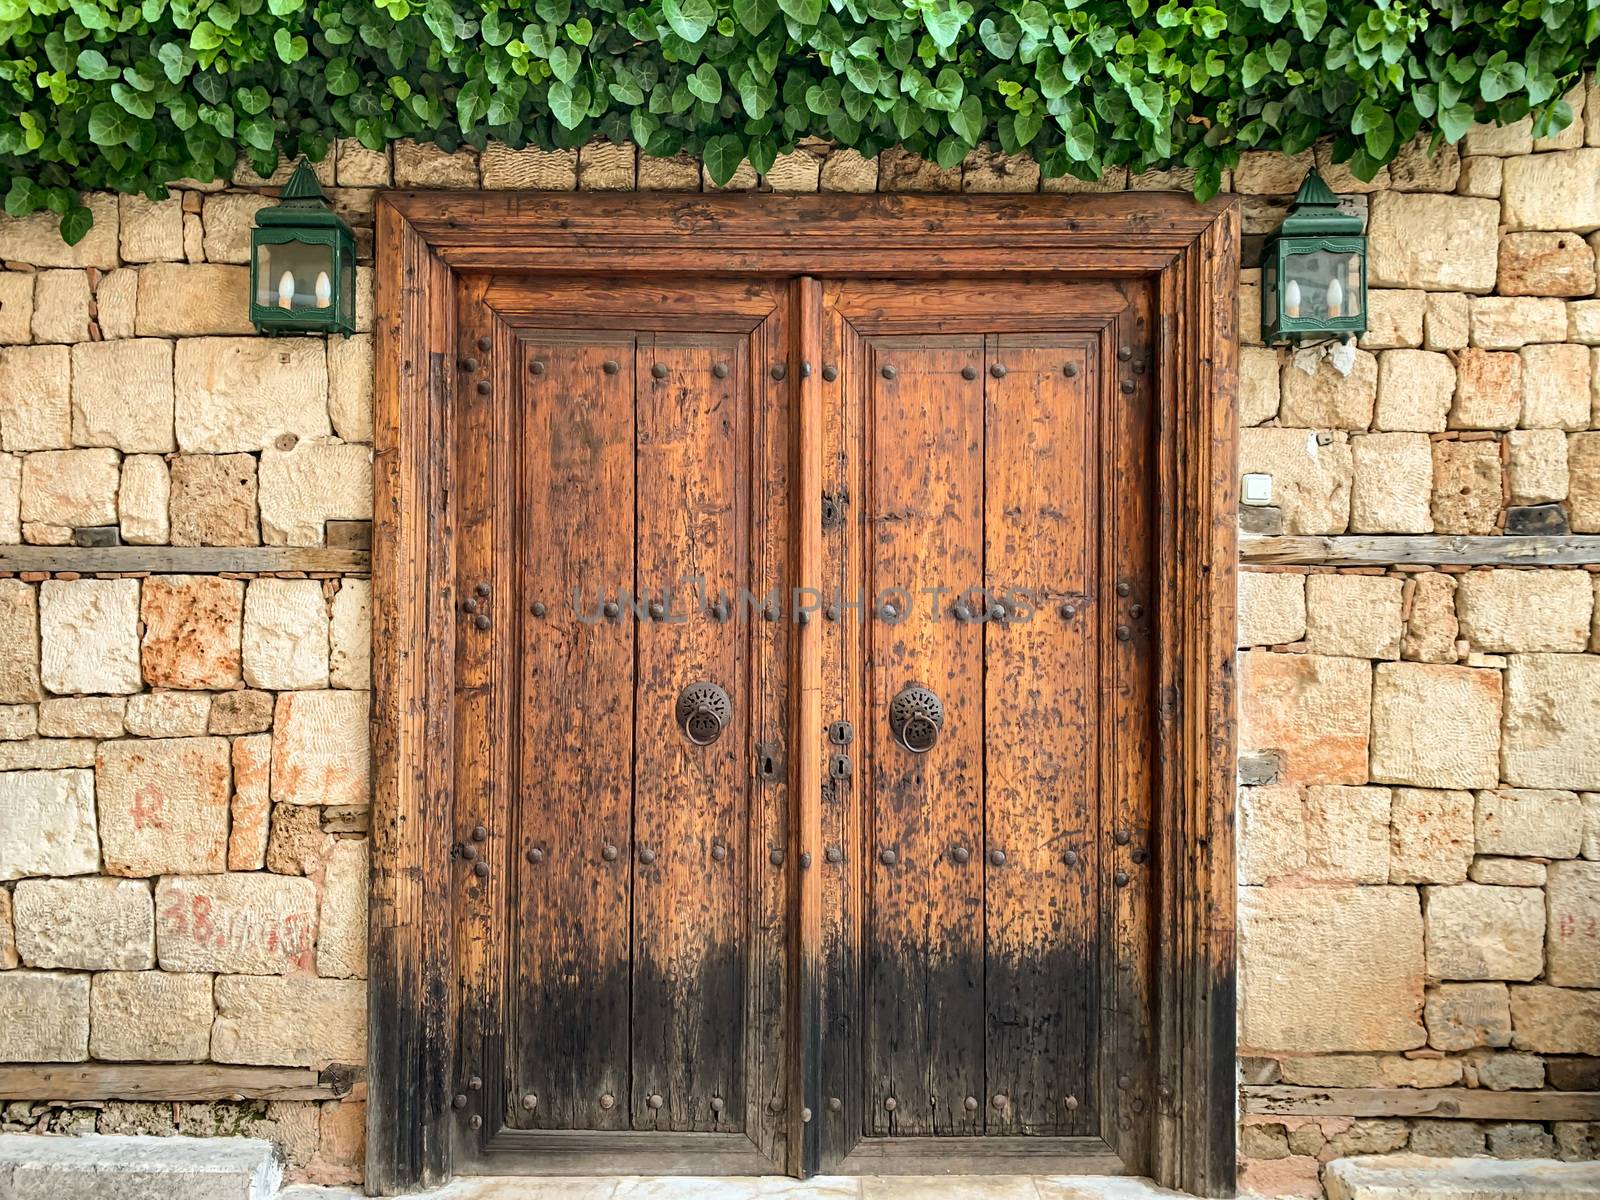 An old historical stone wall with a wooden door gate in Antalya Old town Kaleici, Turkey. Ottoman time architecture. Horizontal stock photo.